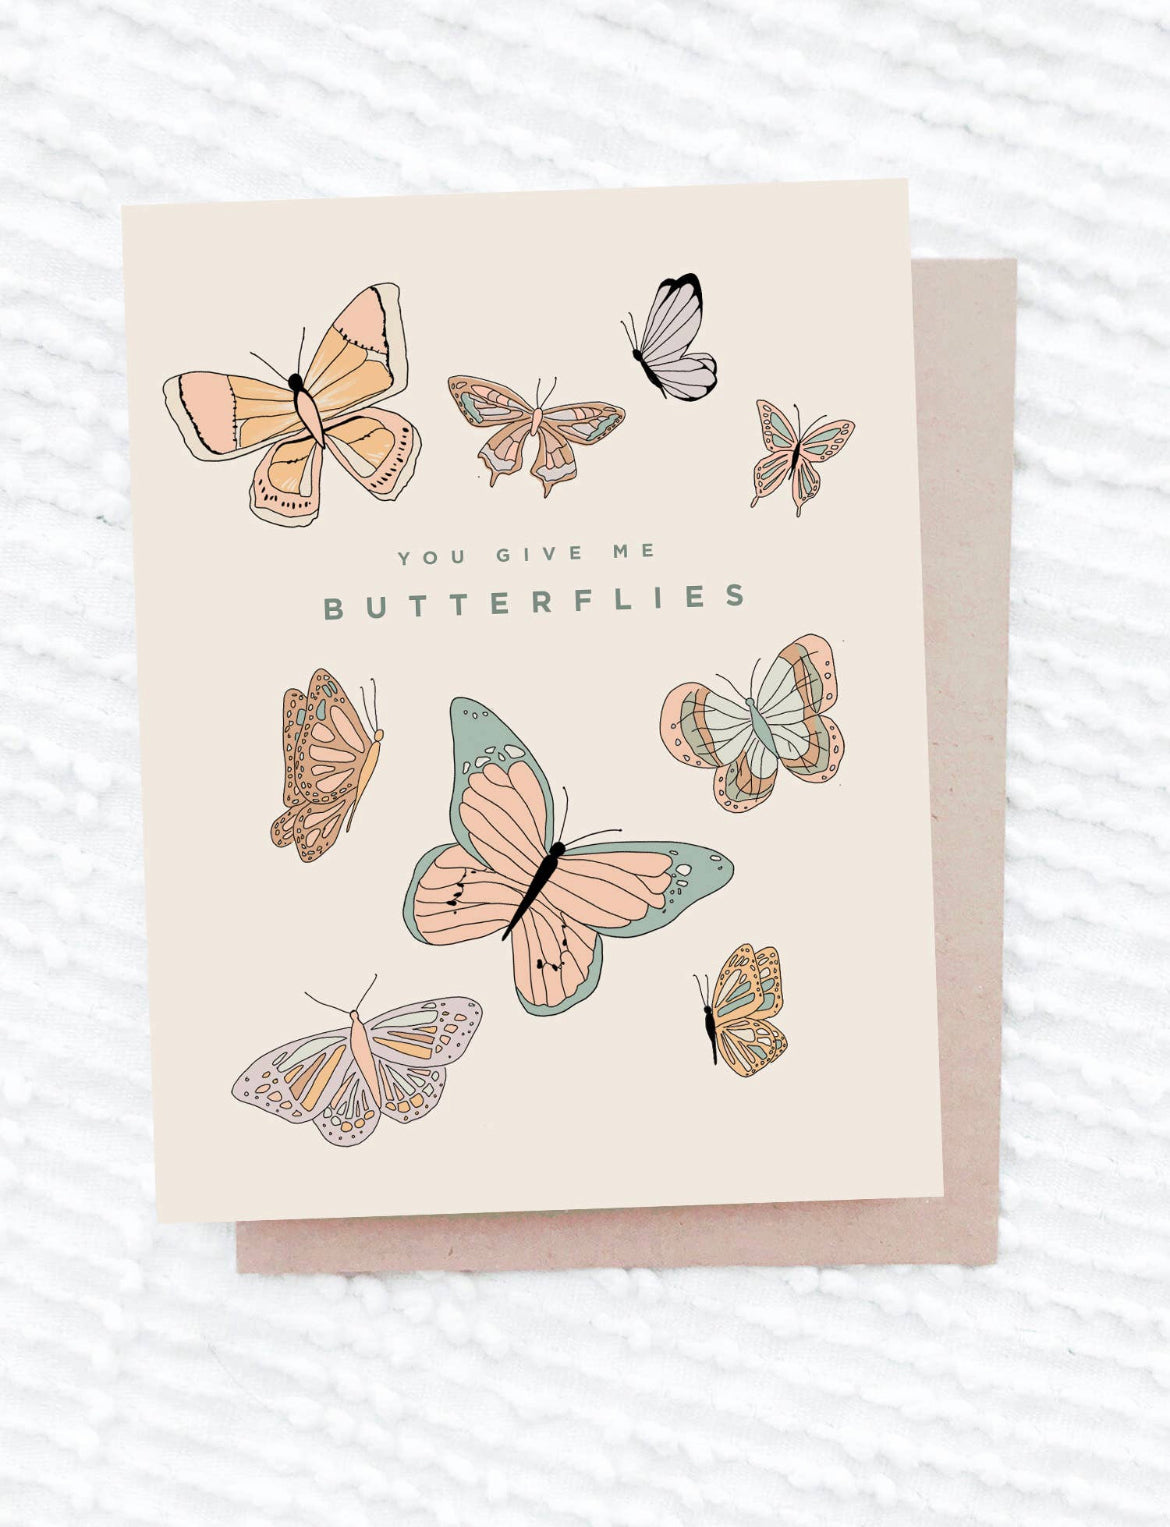 You give me butterflies cards